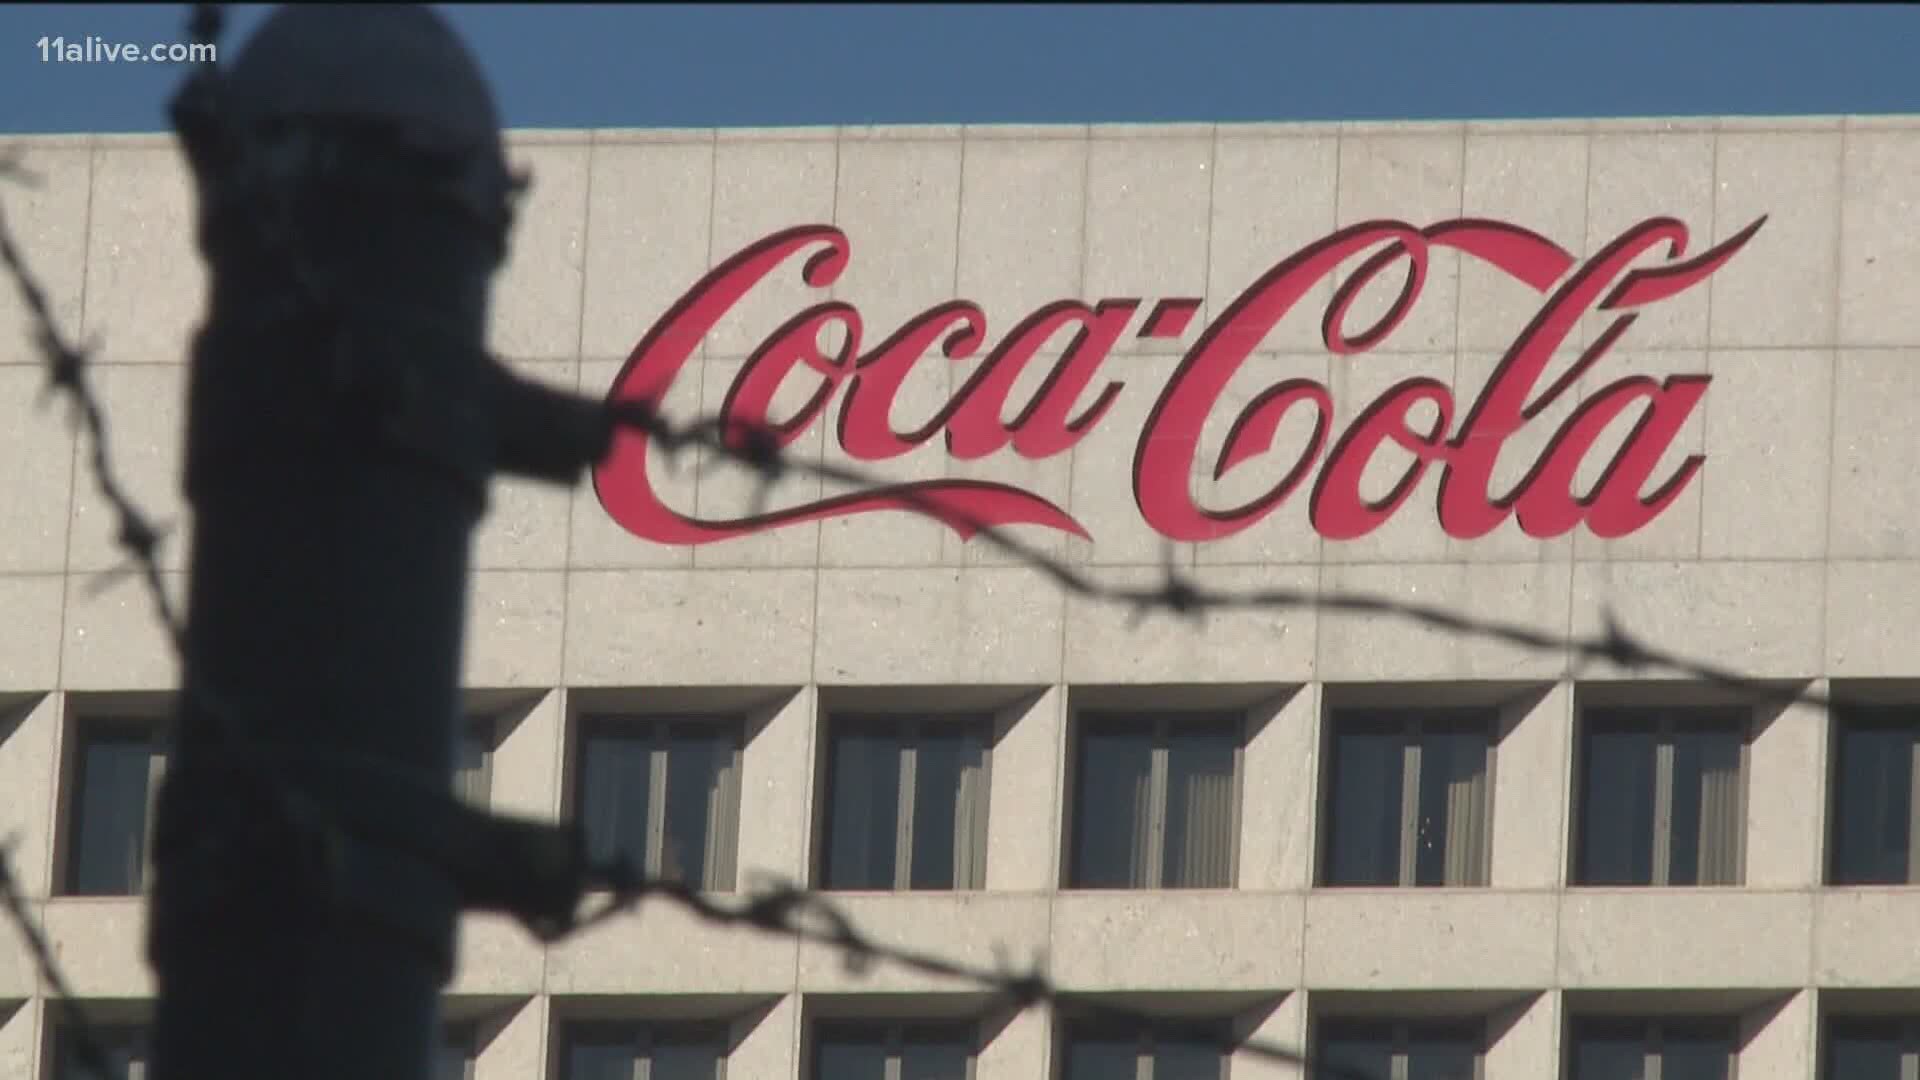 Roughly 4,000 employees in the U.S. and Canada have been offered the option. More than 86,000 people work for Coca Cola worldwide.